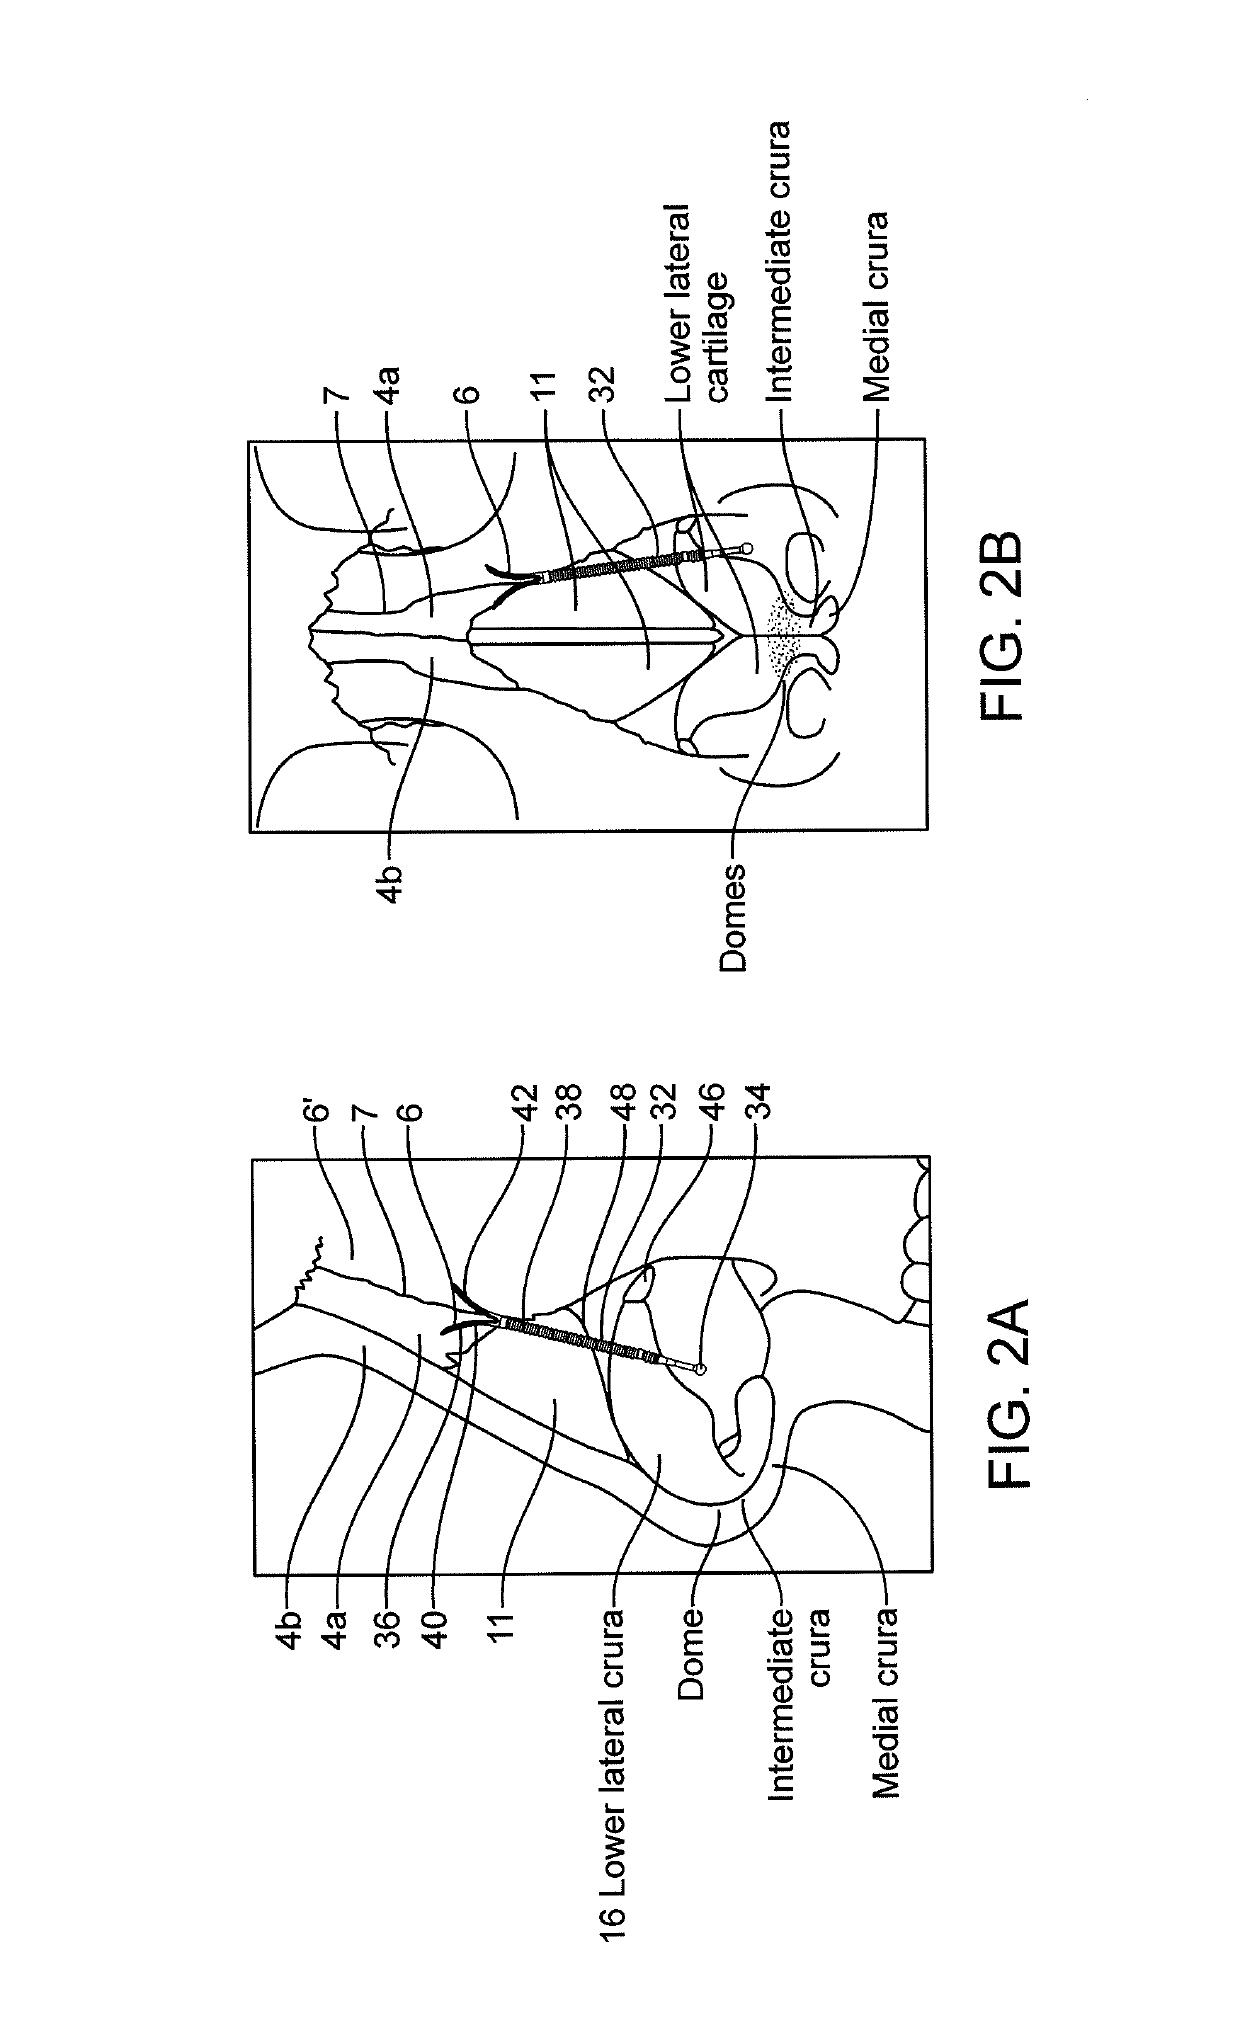 Nasal implants and systems and method of use